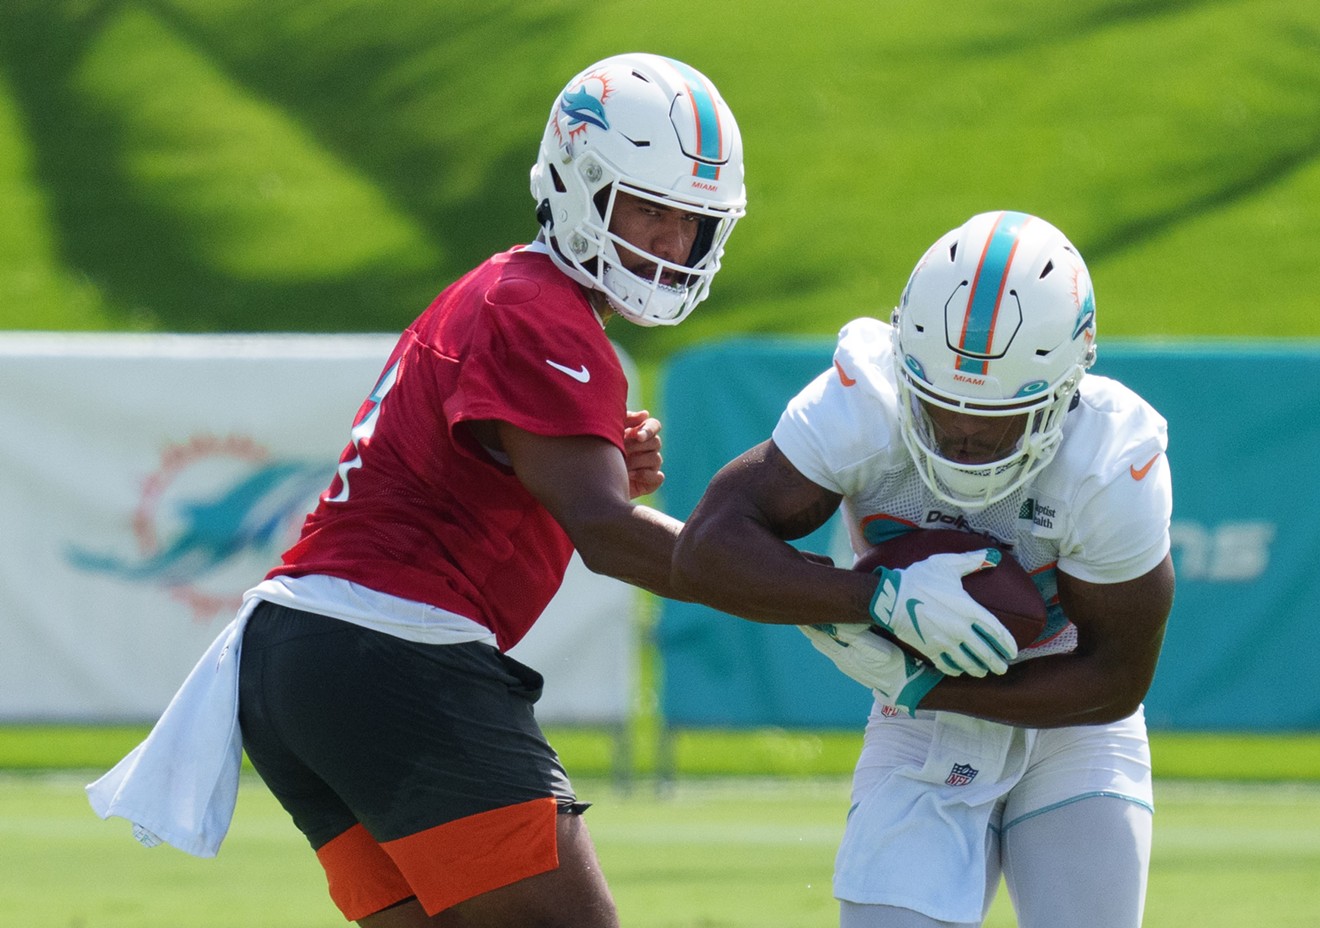 Tua Tagovailoa handing off to Salvon Ahmed during Miami Dolphins training camp in 2021